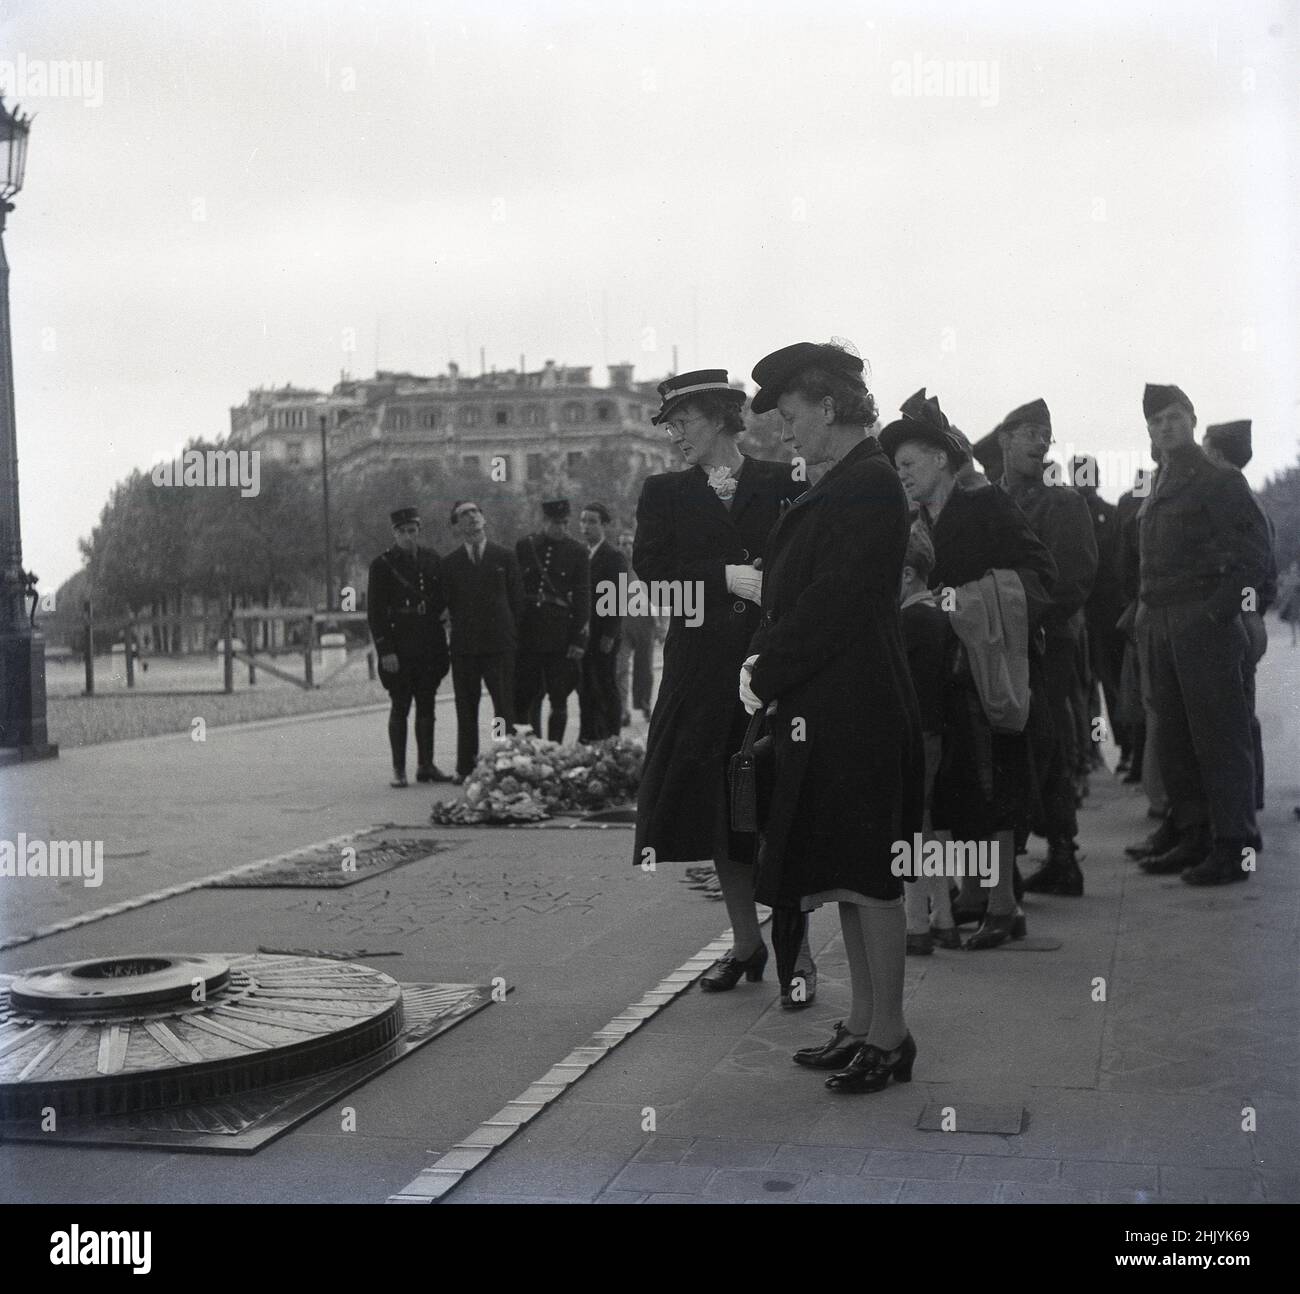 1950s, historical, lady civilians, some war widows, together with soliders, gather to pay their respects at the Tomb of the Unknown Solider at the base of the Arc de Triomphe, Paris, France. The burial site of a fallen French WW1 solider is a scared place, a permanent reminder of the enormous sacrifices made in the great war. Stock Photo